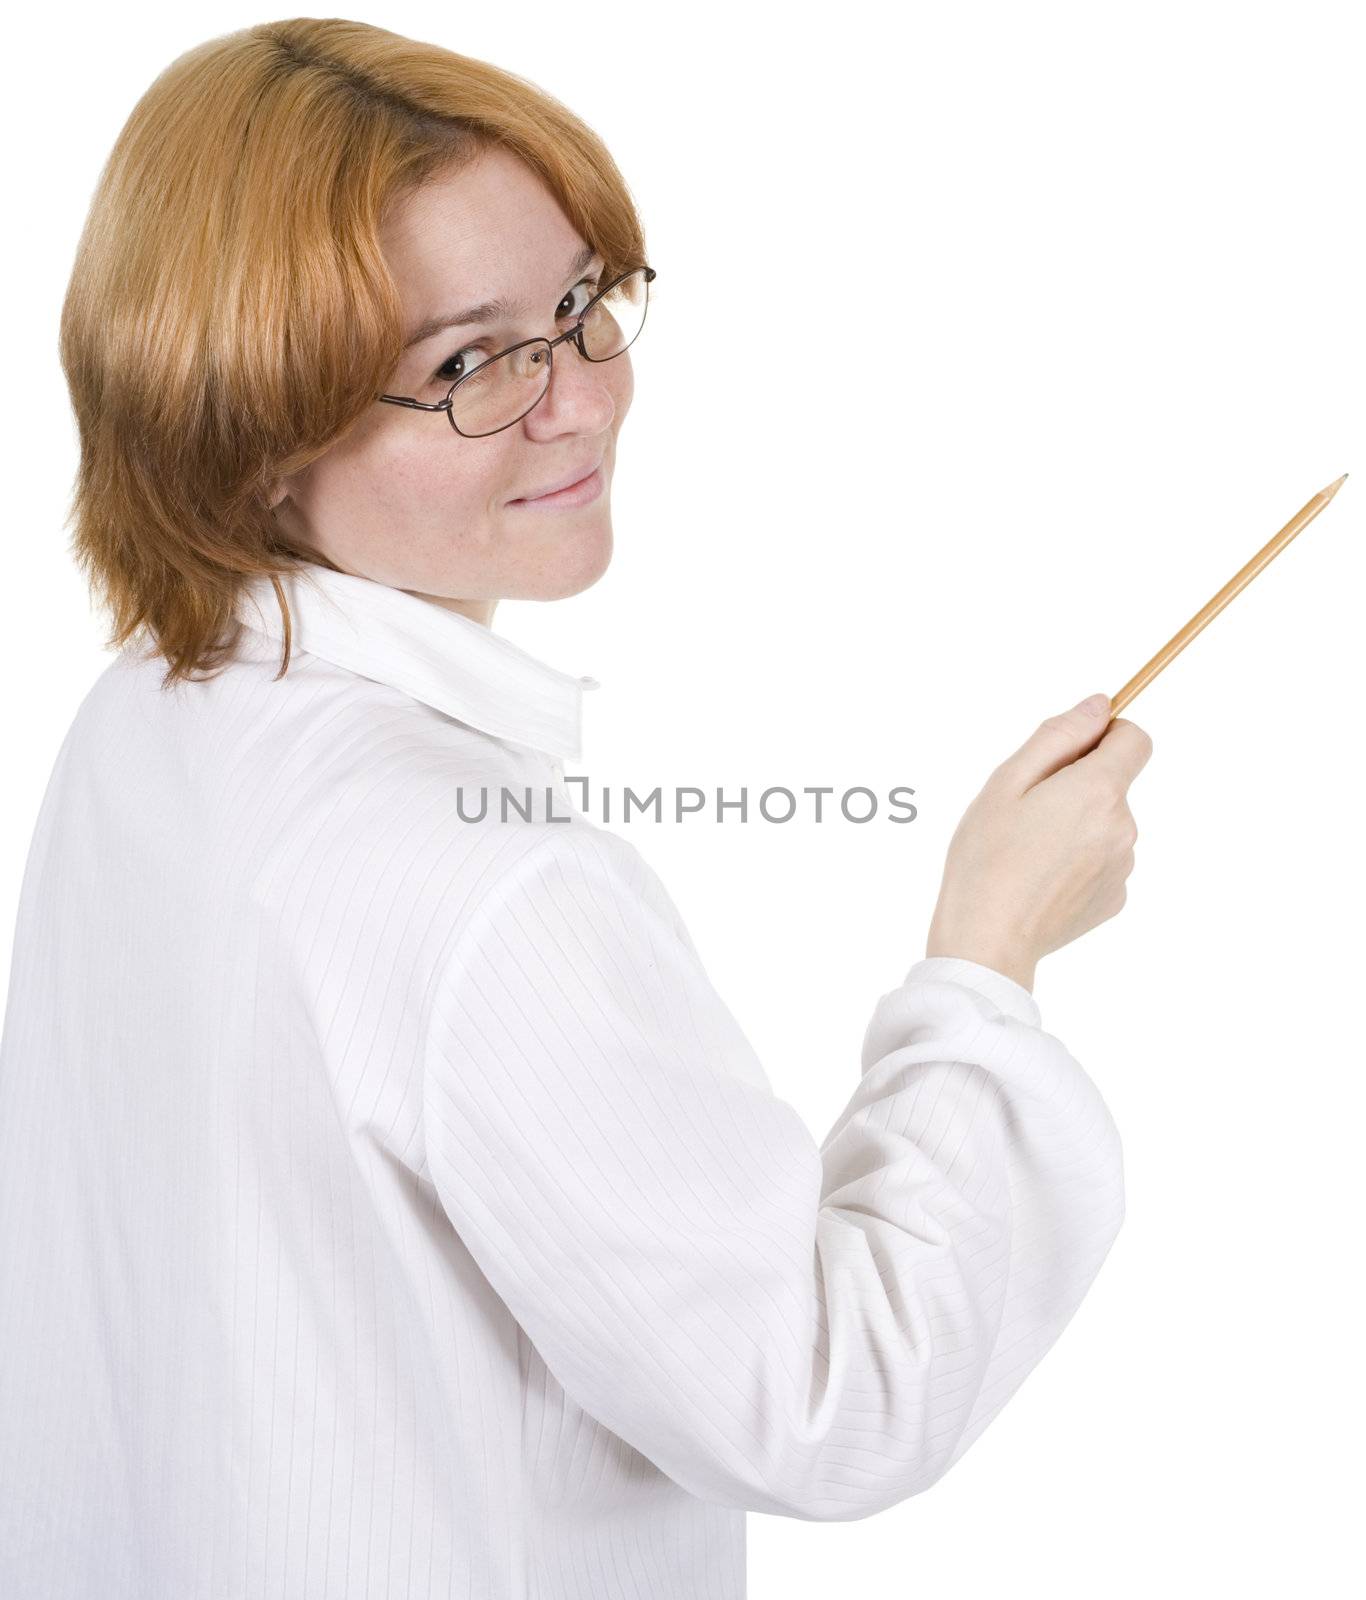 The woman in white clothes with a pencil in a hand